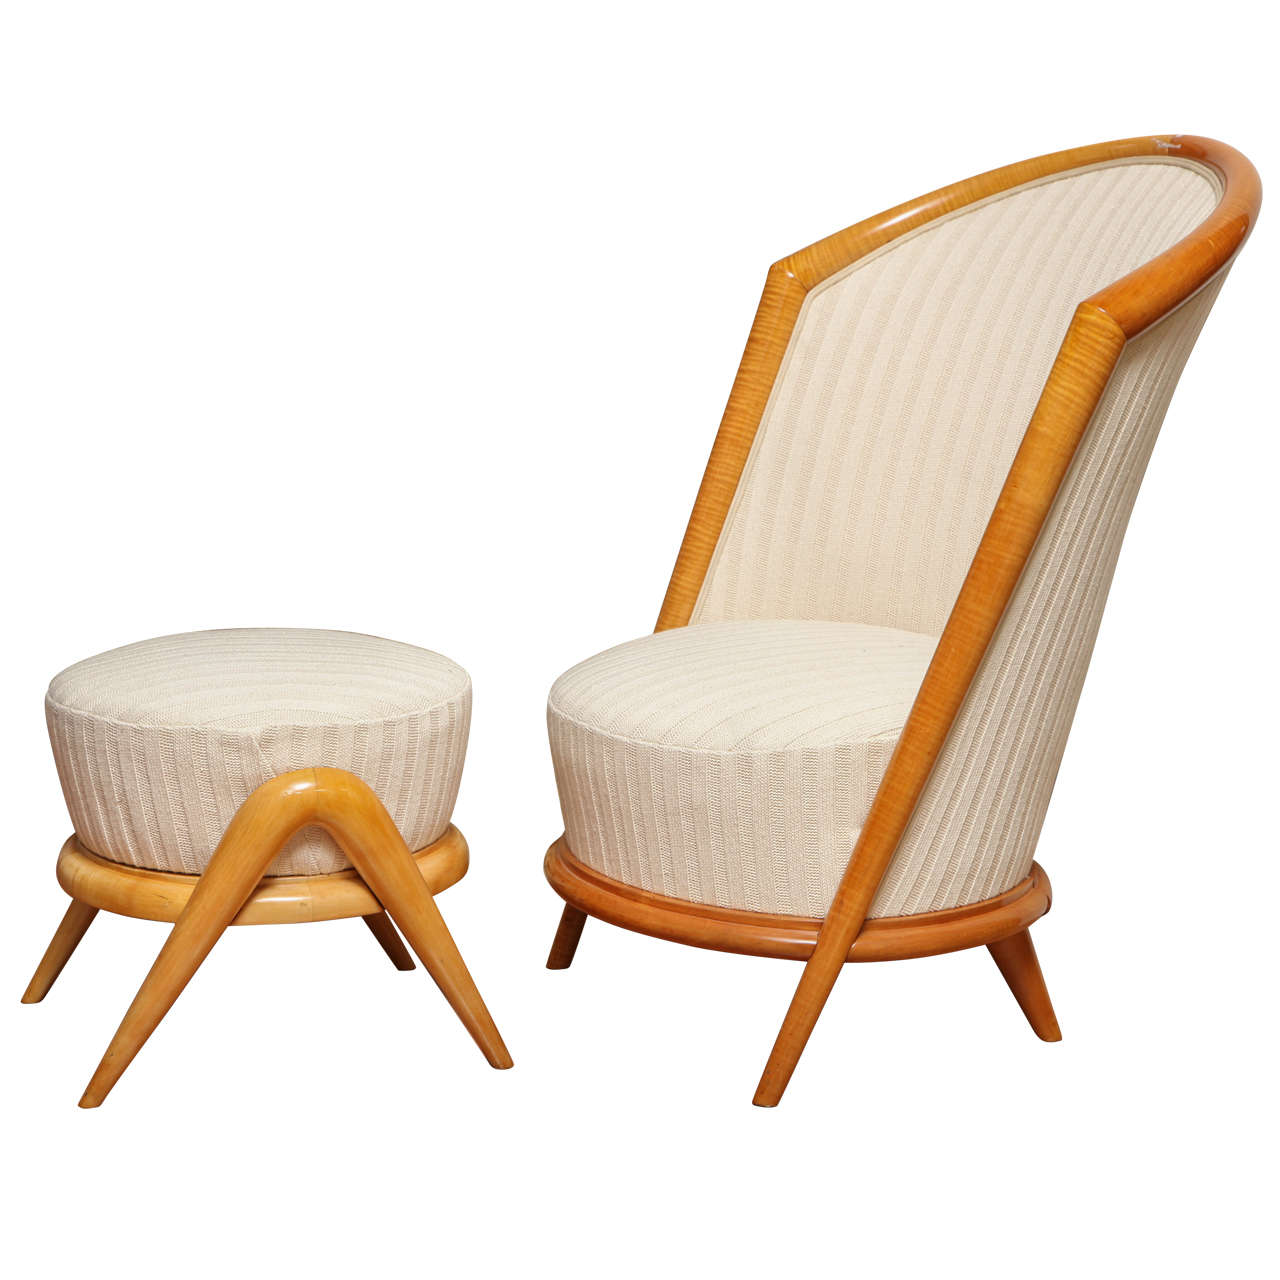 French fireside chair, 1950s, offered by Paul Stamati Gallery LLC